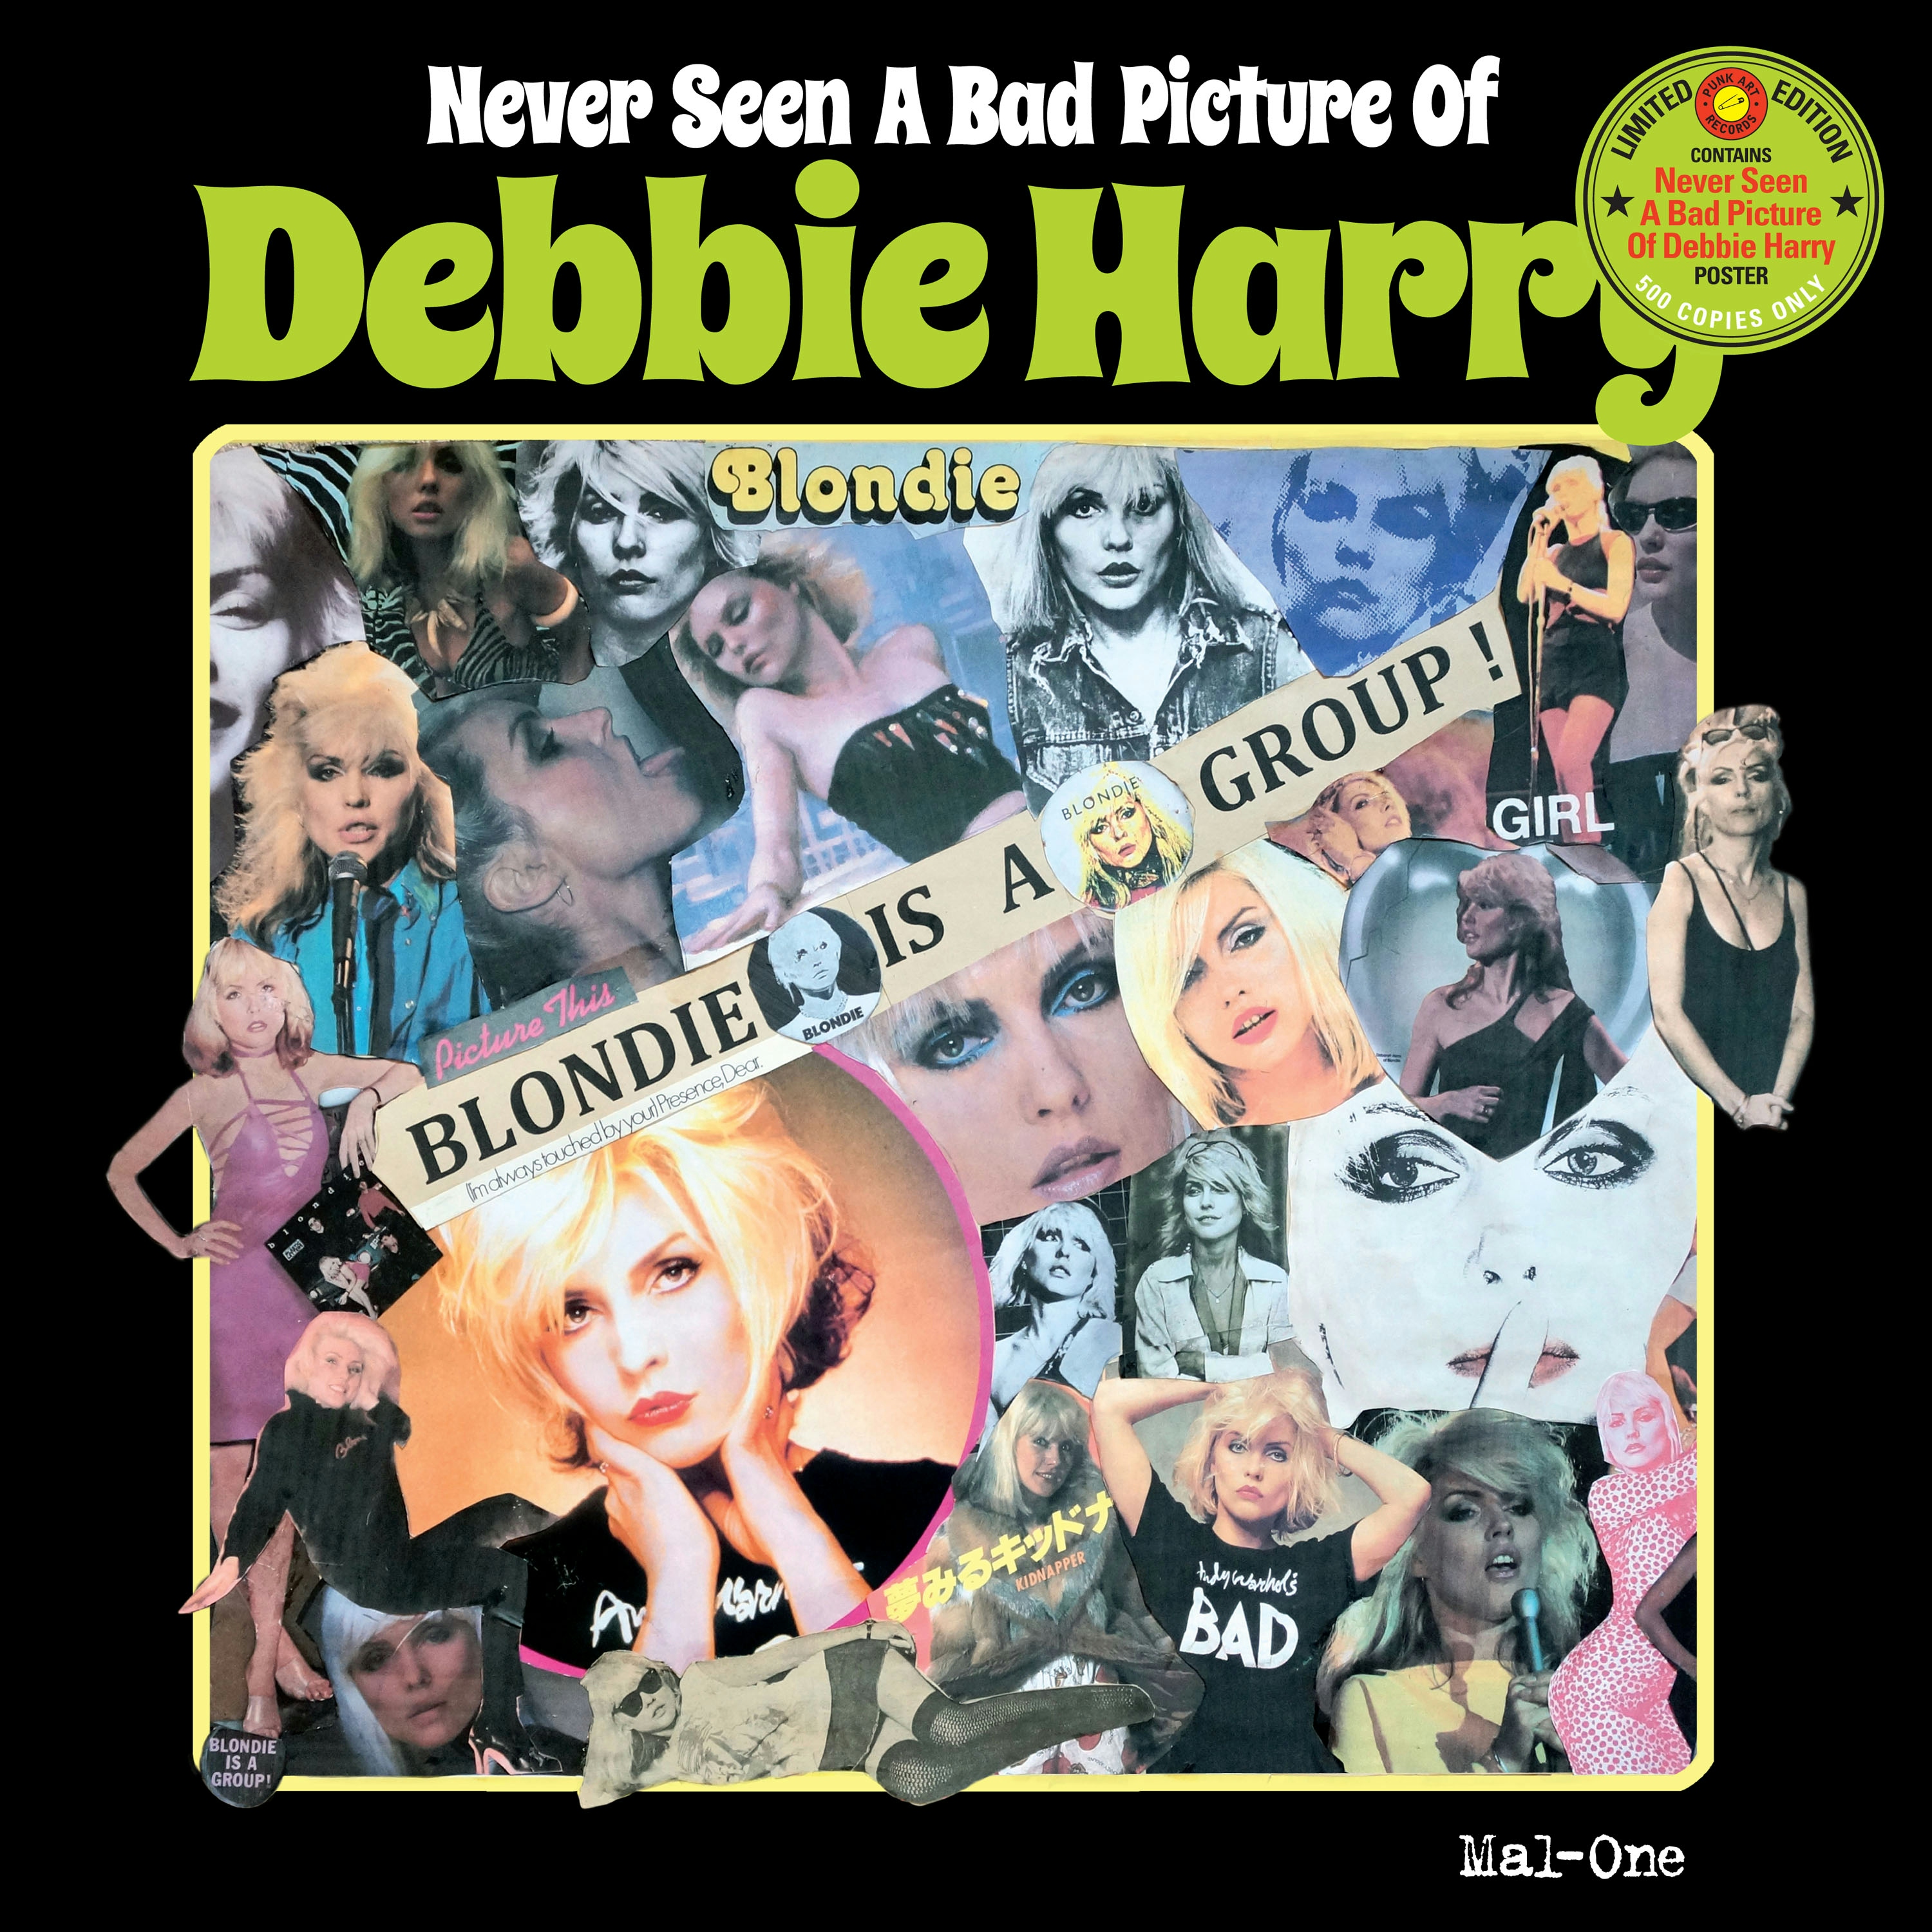 Album artwork for Never Seen a Bad Picture of Debbie Harry by Mal-One